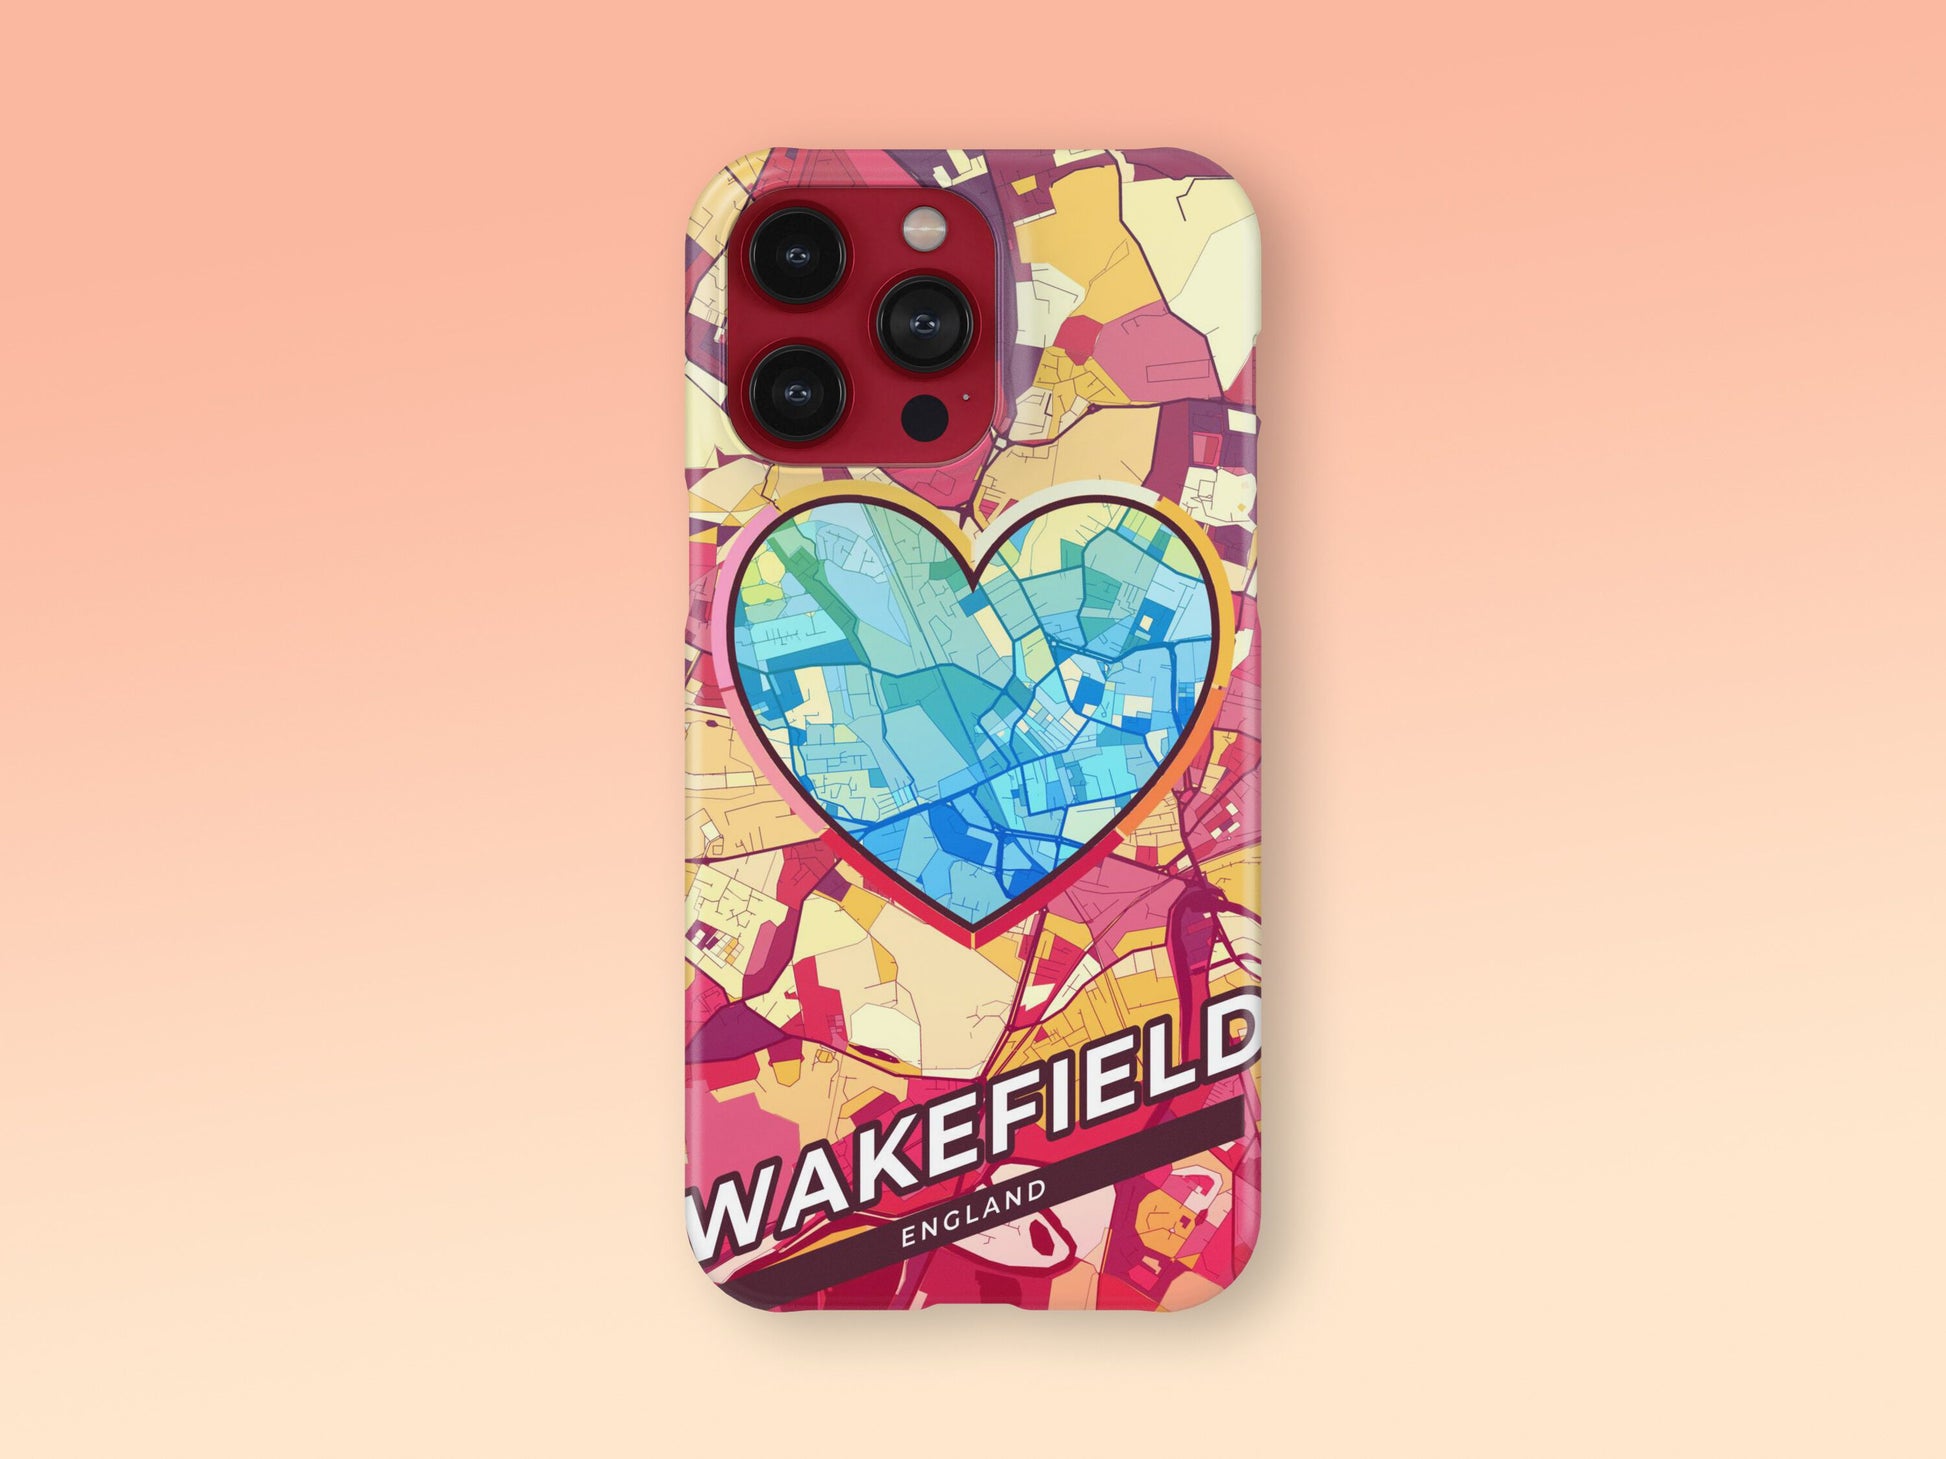 Wakefield England slim phone case with colorful icon 2